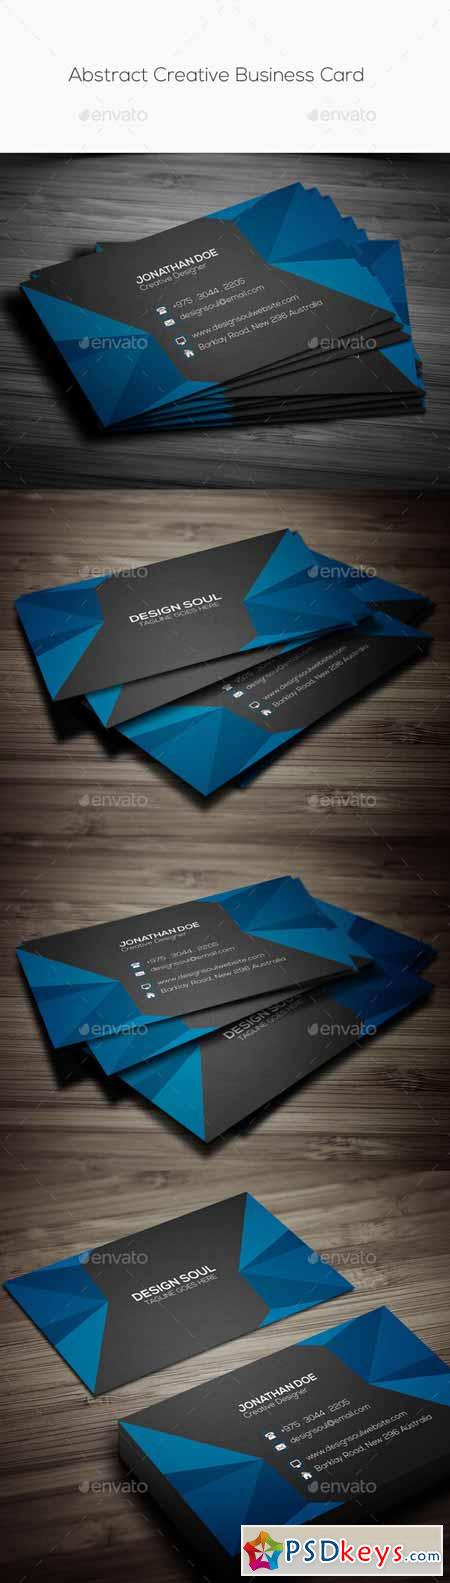 Abstract Creative Business Card 11252965